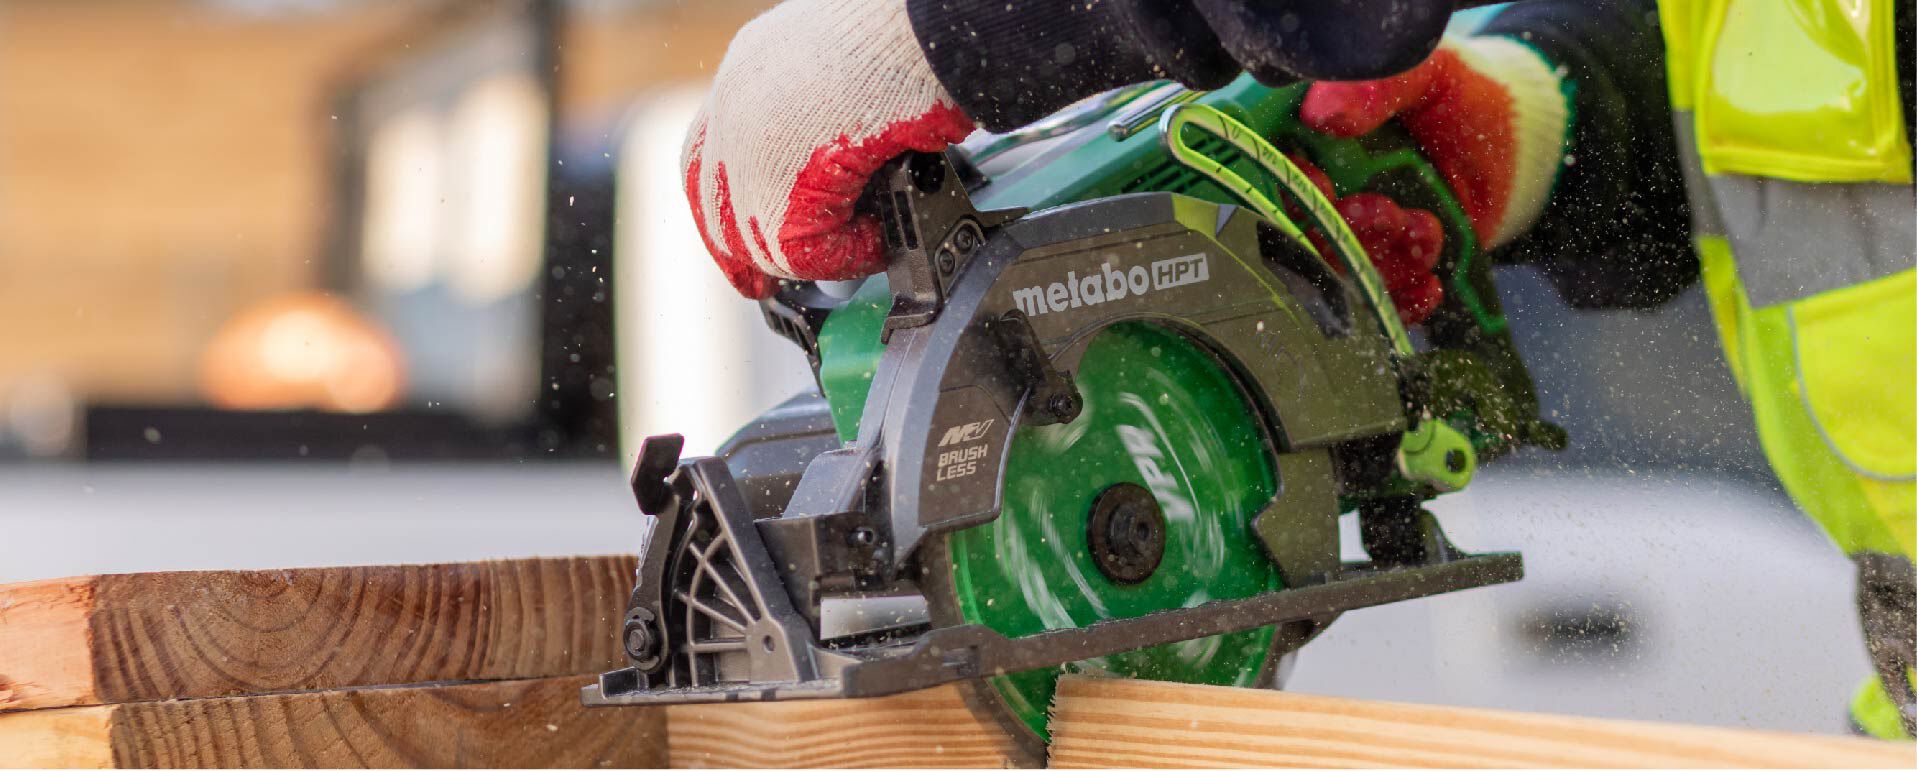 Metabo Hpt Products | CPO Outlets